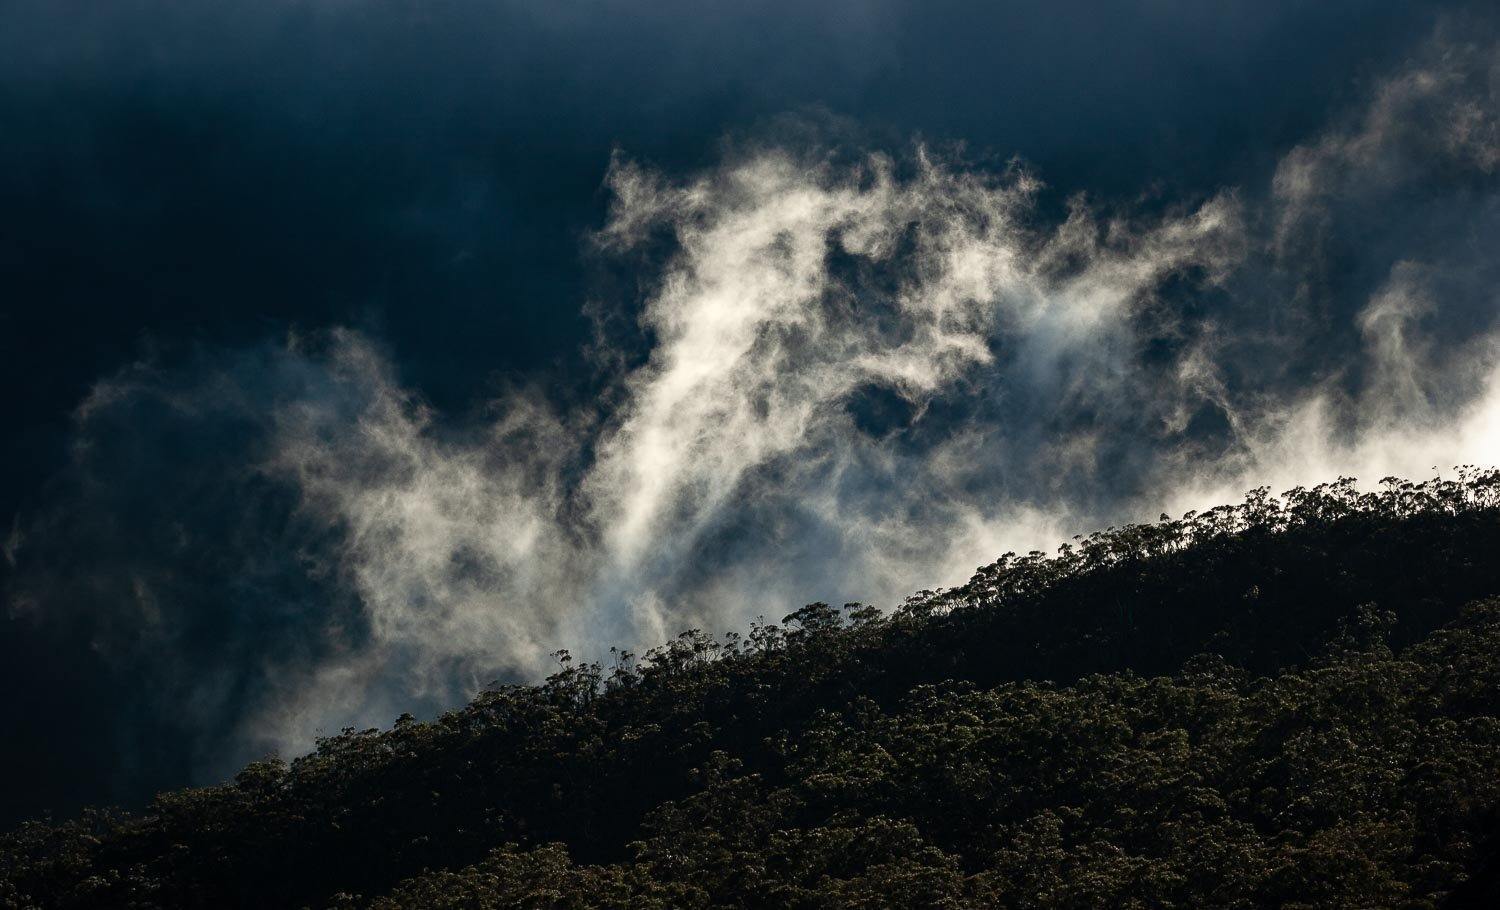 A large and dark green land with dark stormy clouds over, Rising Clouds - The Grampians, VIC